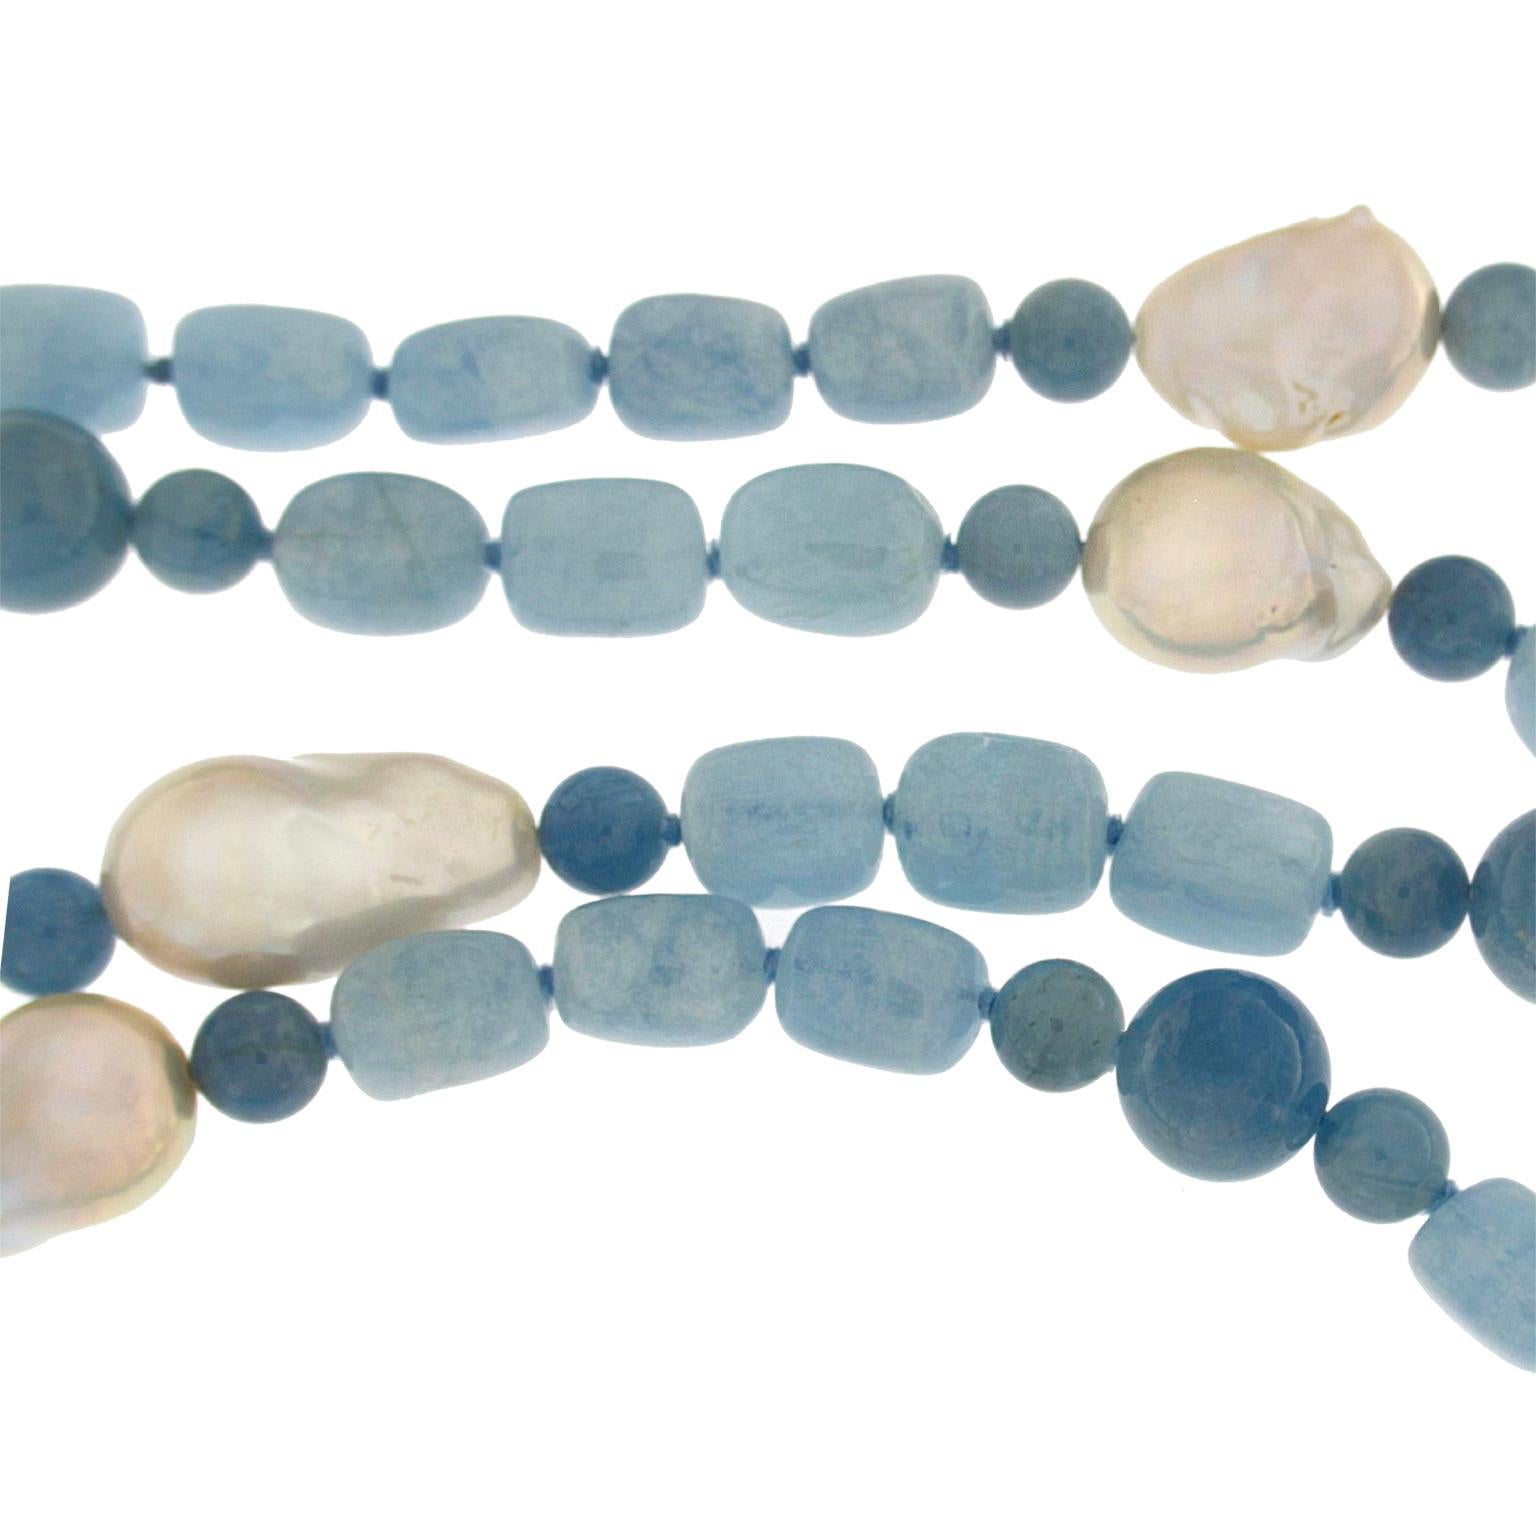 32 inch freshwater baroque pearls with mirror cut aquamarine and 18kt gold rondelles